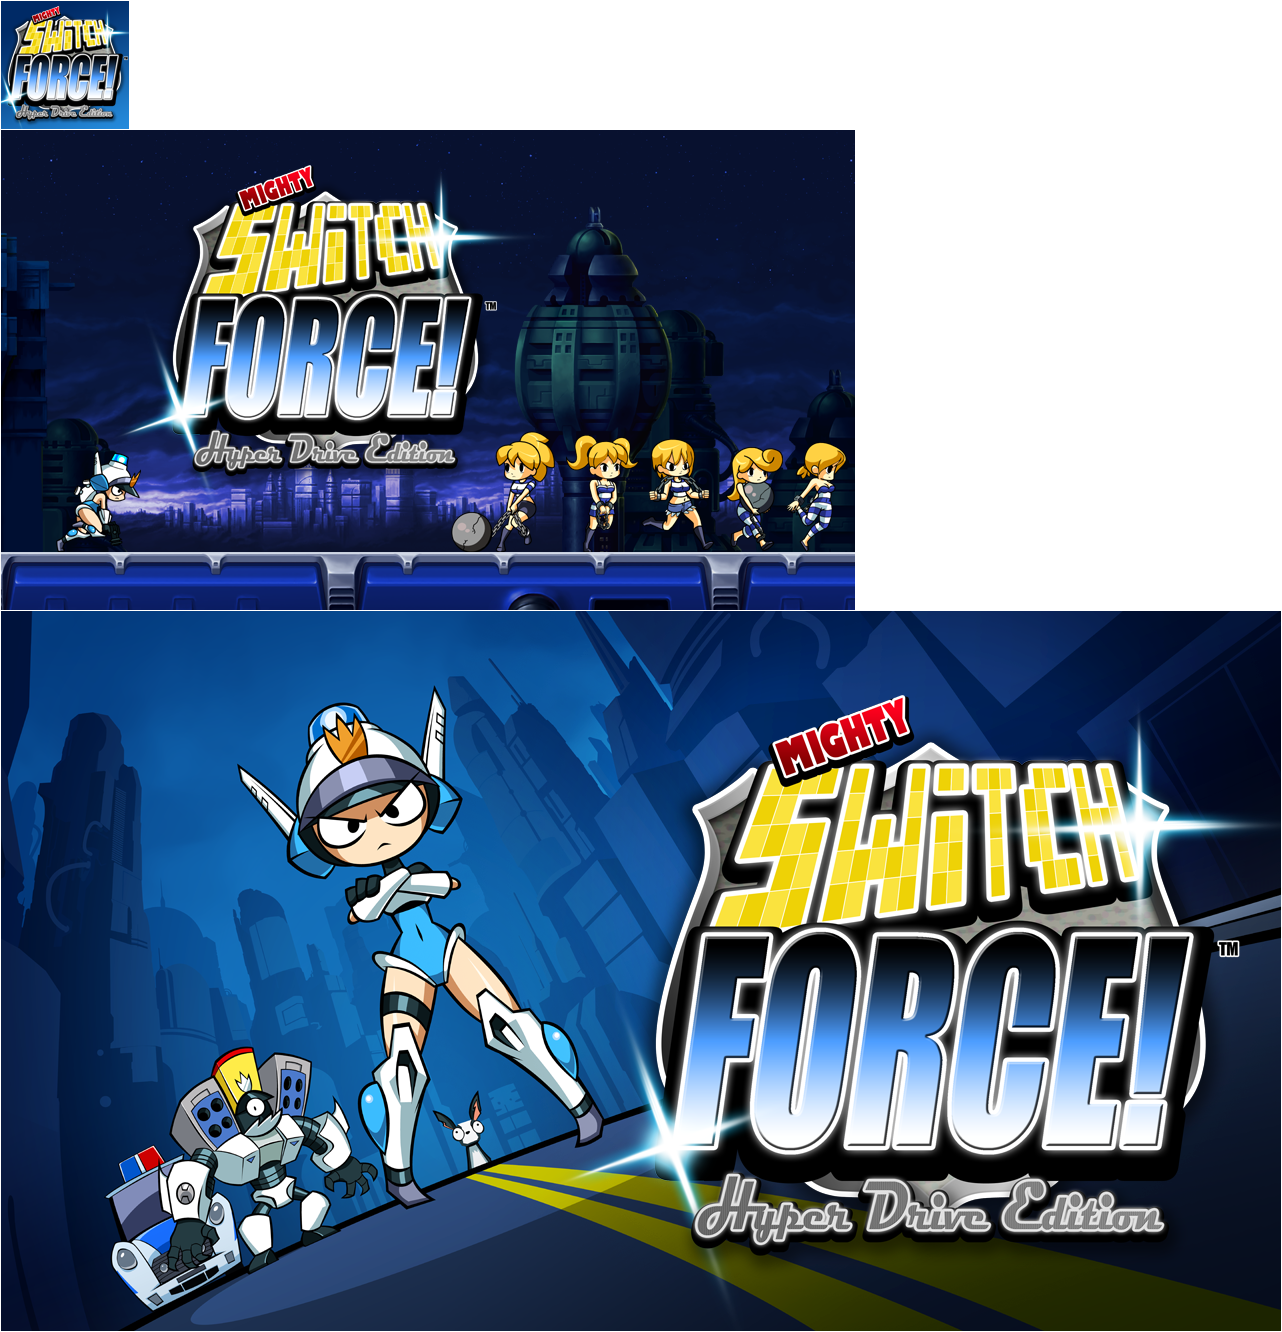 Mighty Switch Force! Hyper Drive Edition - HOME Menu Icon and Banners